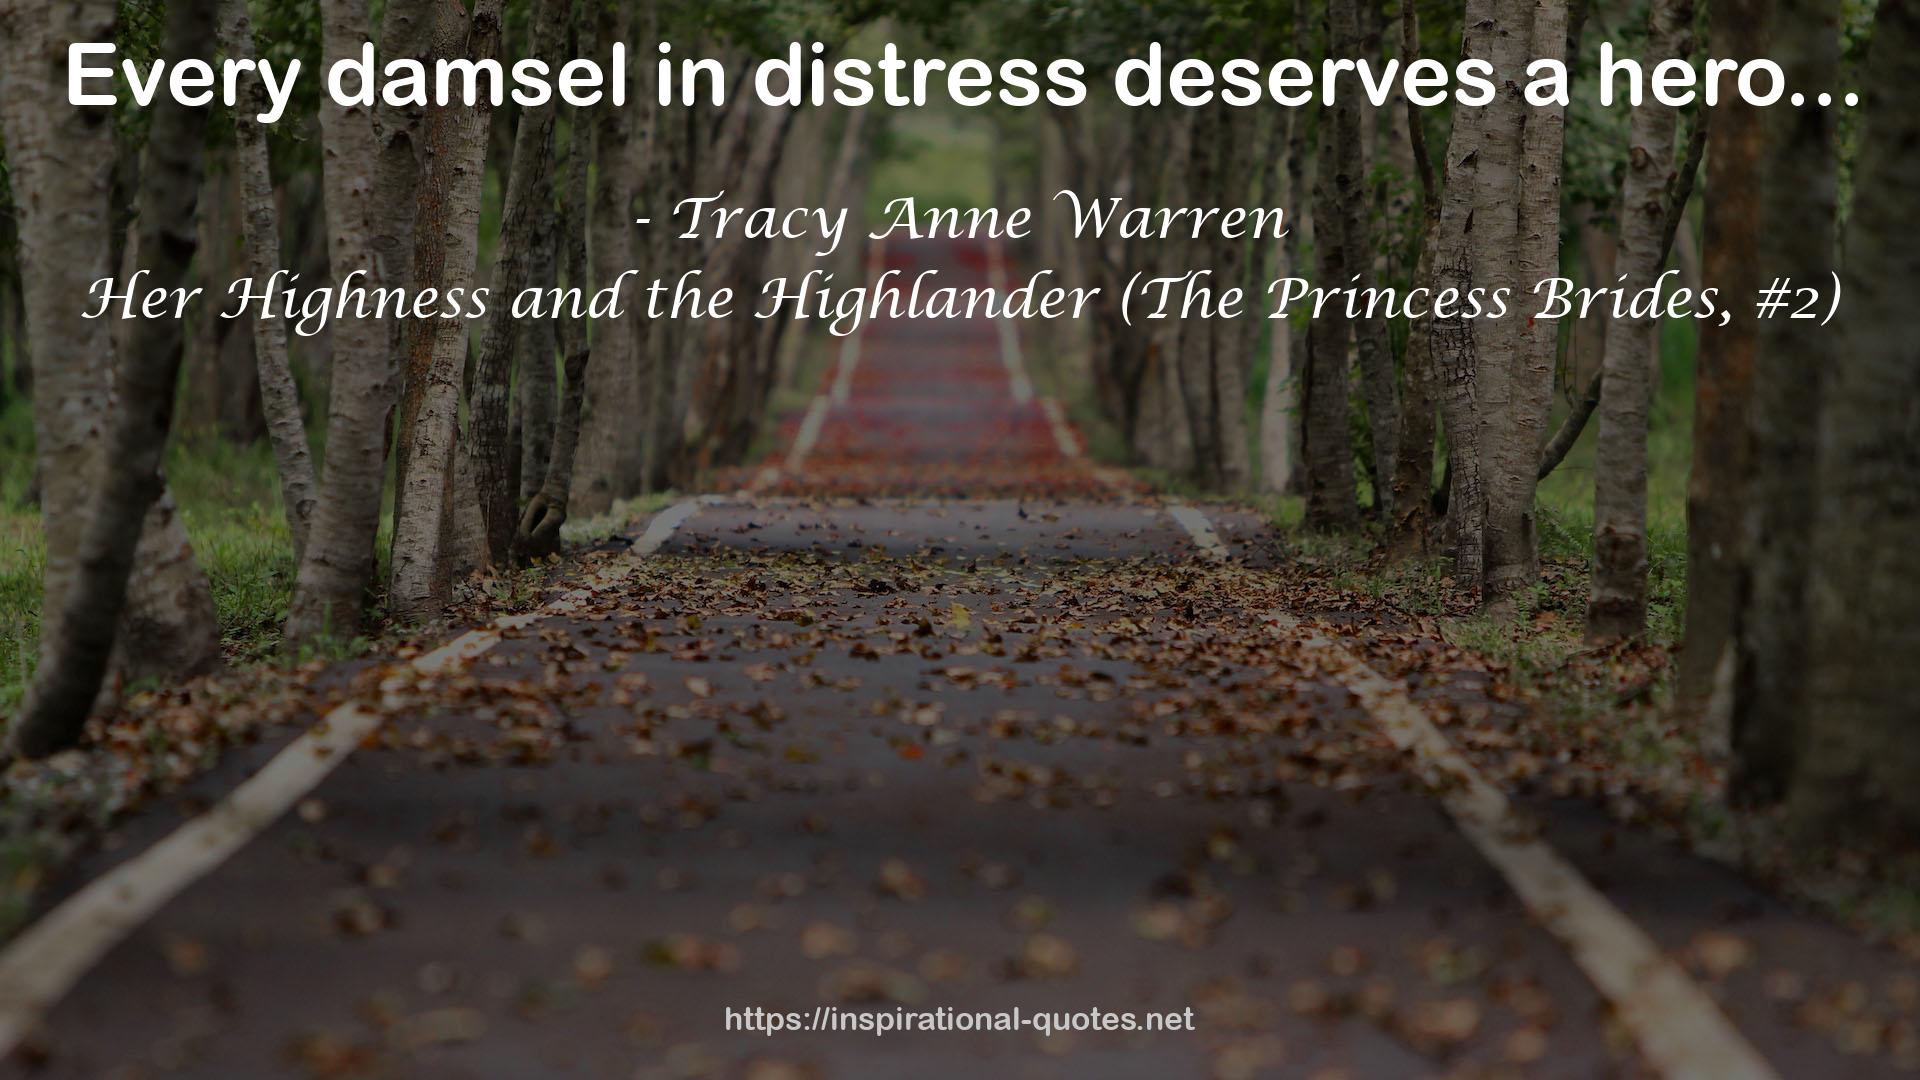 Her Highness and the Highlander (The Princess Brides, #2) QUOTES